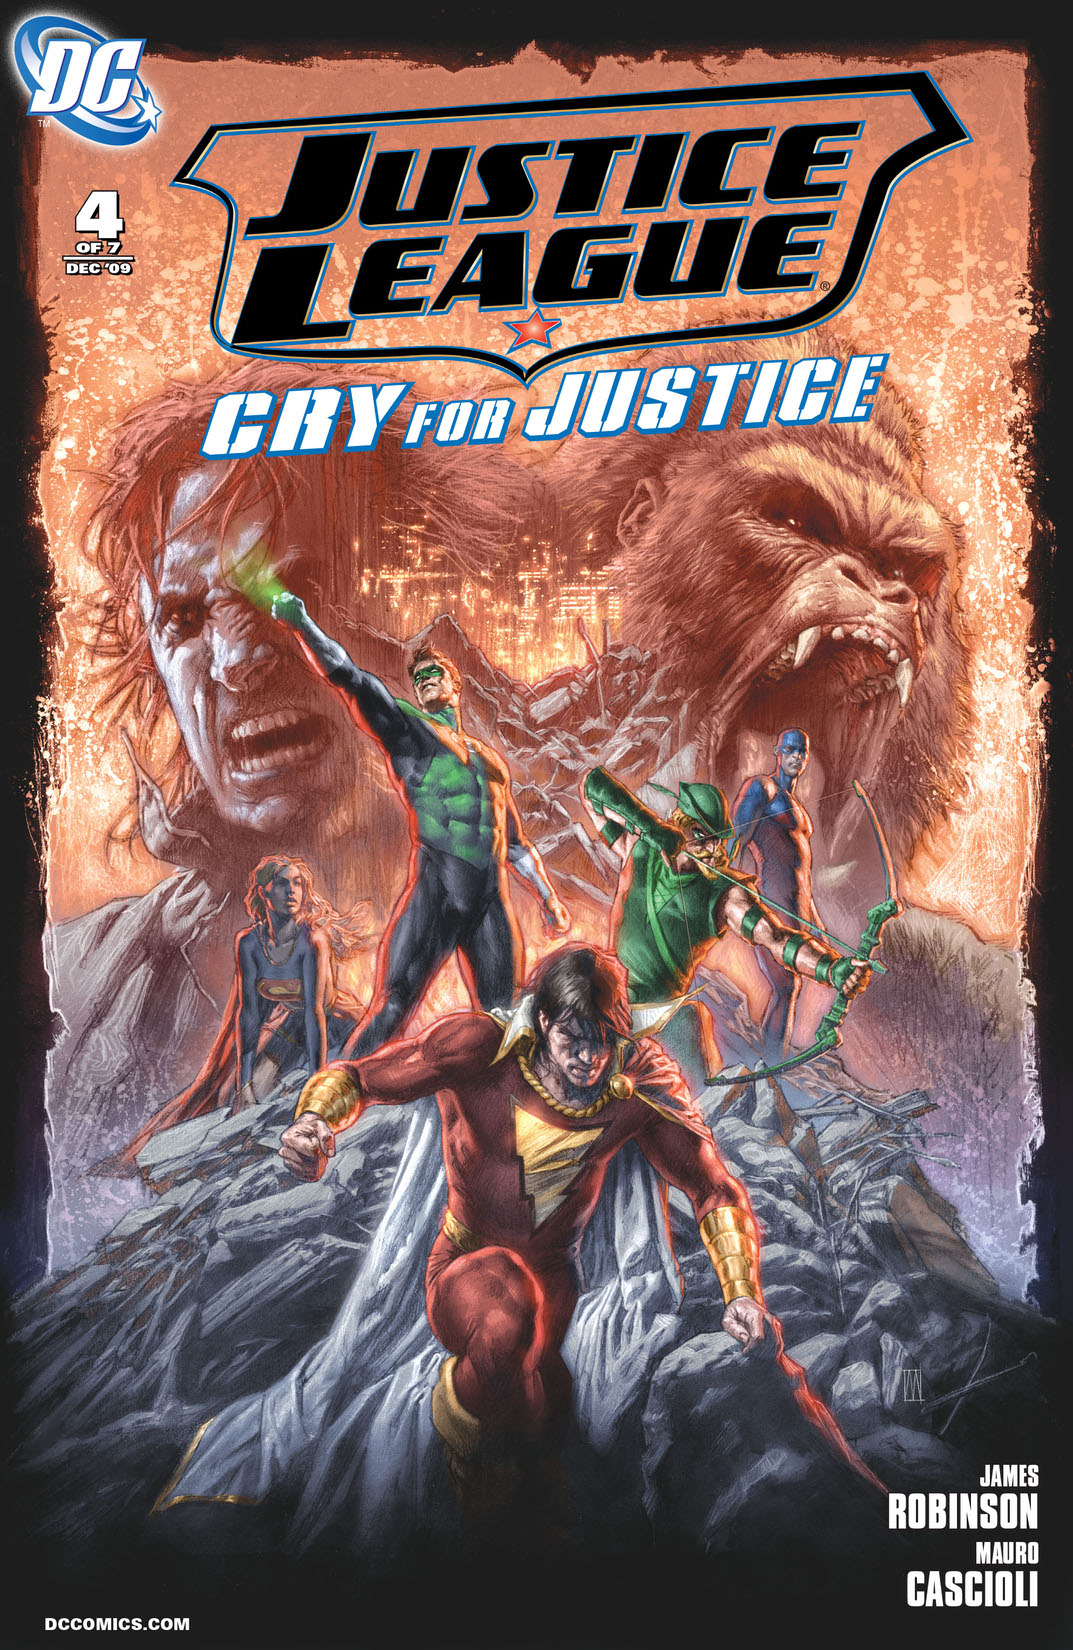 Justice League: Cry for Justice #4 preview images